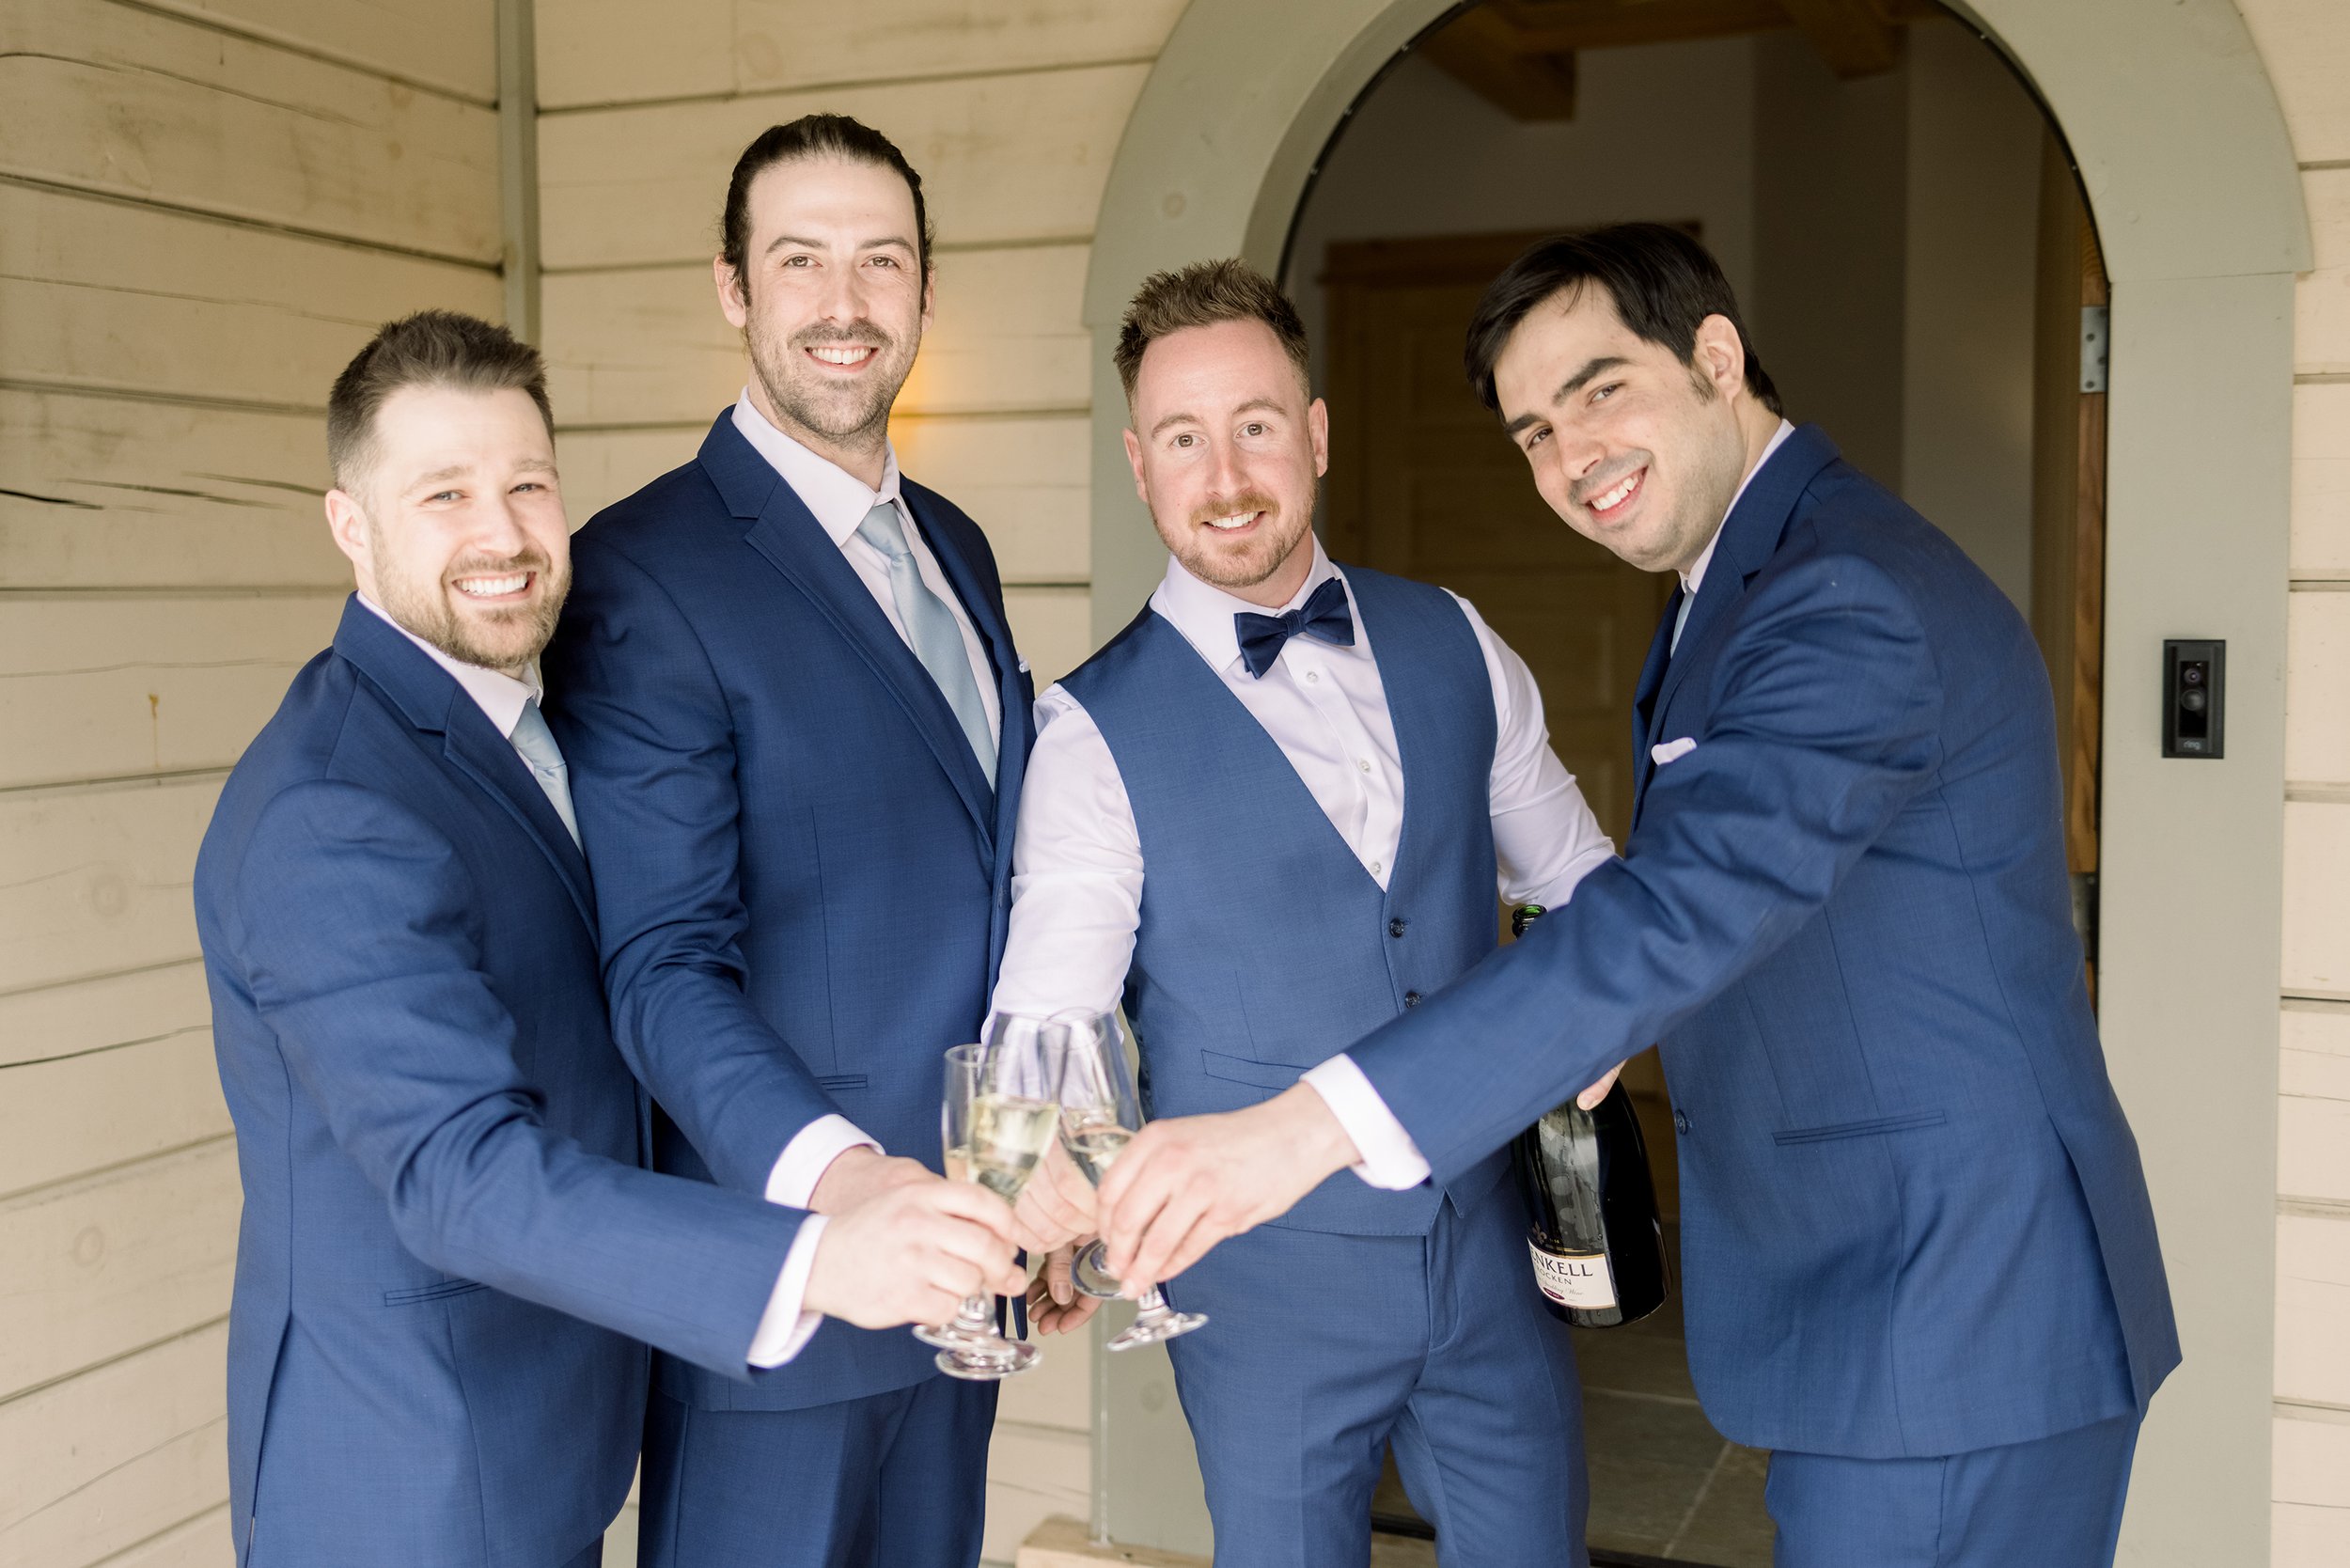  Chelsea Mason Photography captures the groom and groomsmen toasting during a Wakefield wedding. toasting groomsmen Wakefield wedding #ChelseaMasonPhotography #ChelseaMasonWeddings #WakefieldWeddings #LeBelvedere #Wakefieldweddingphotographers 